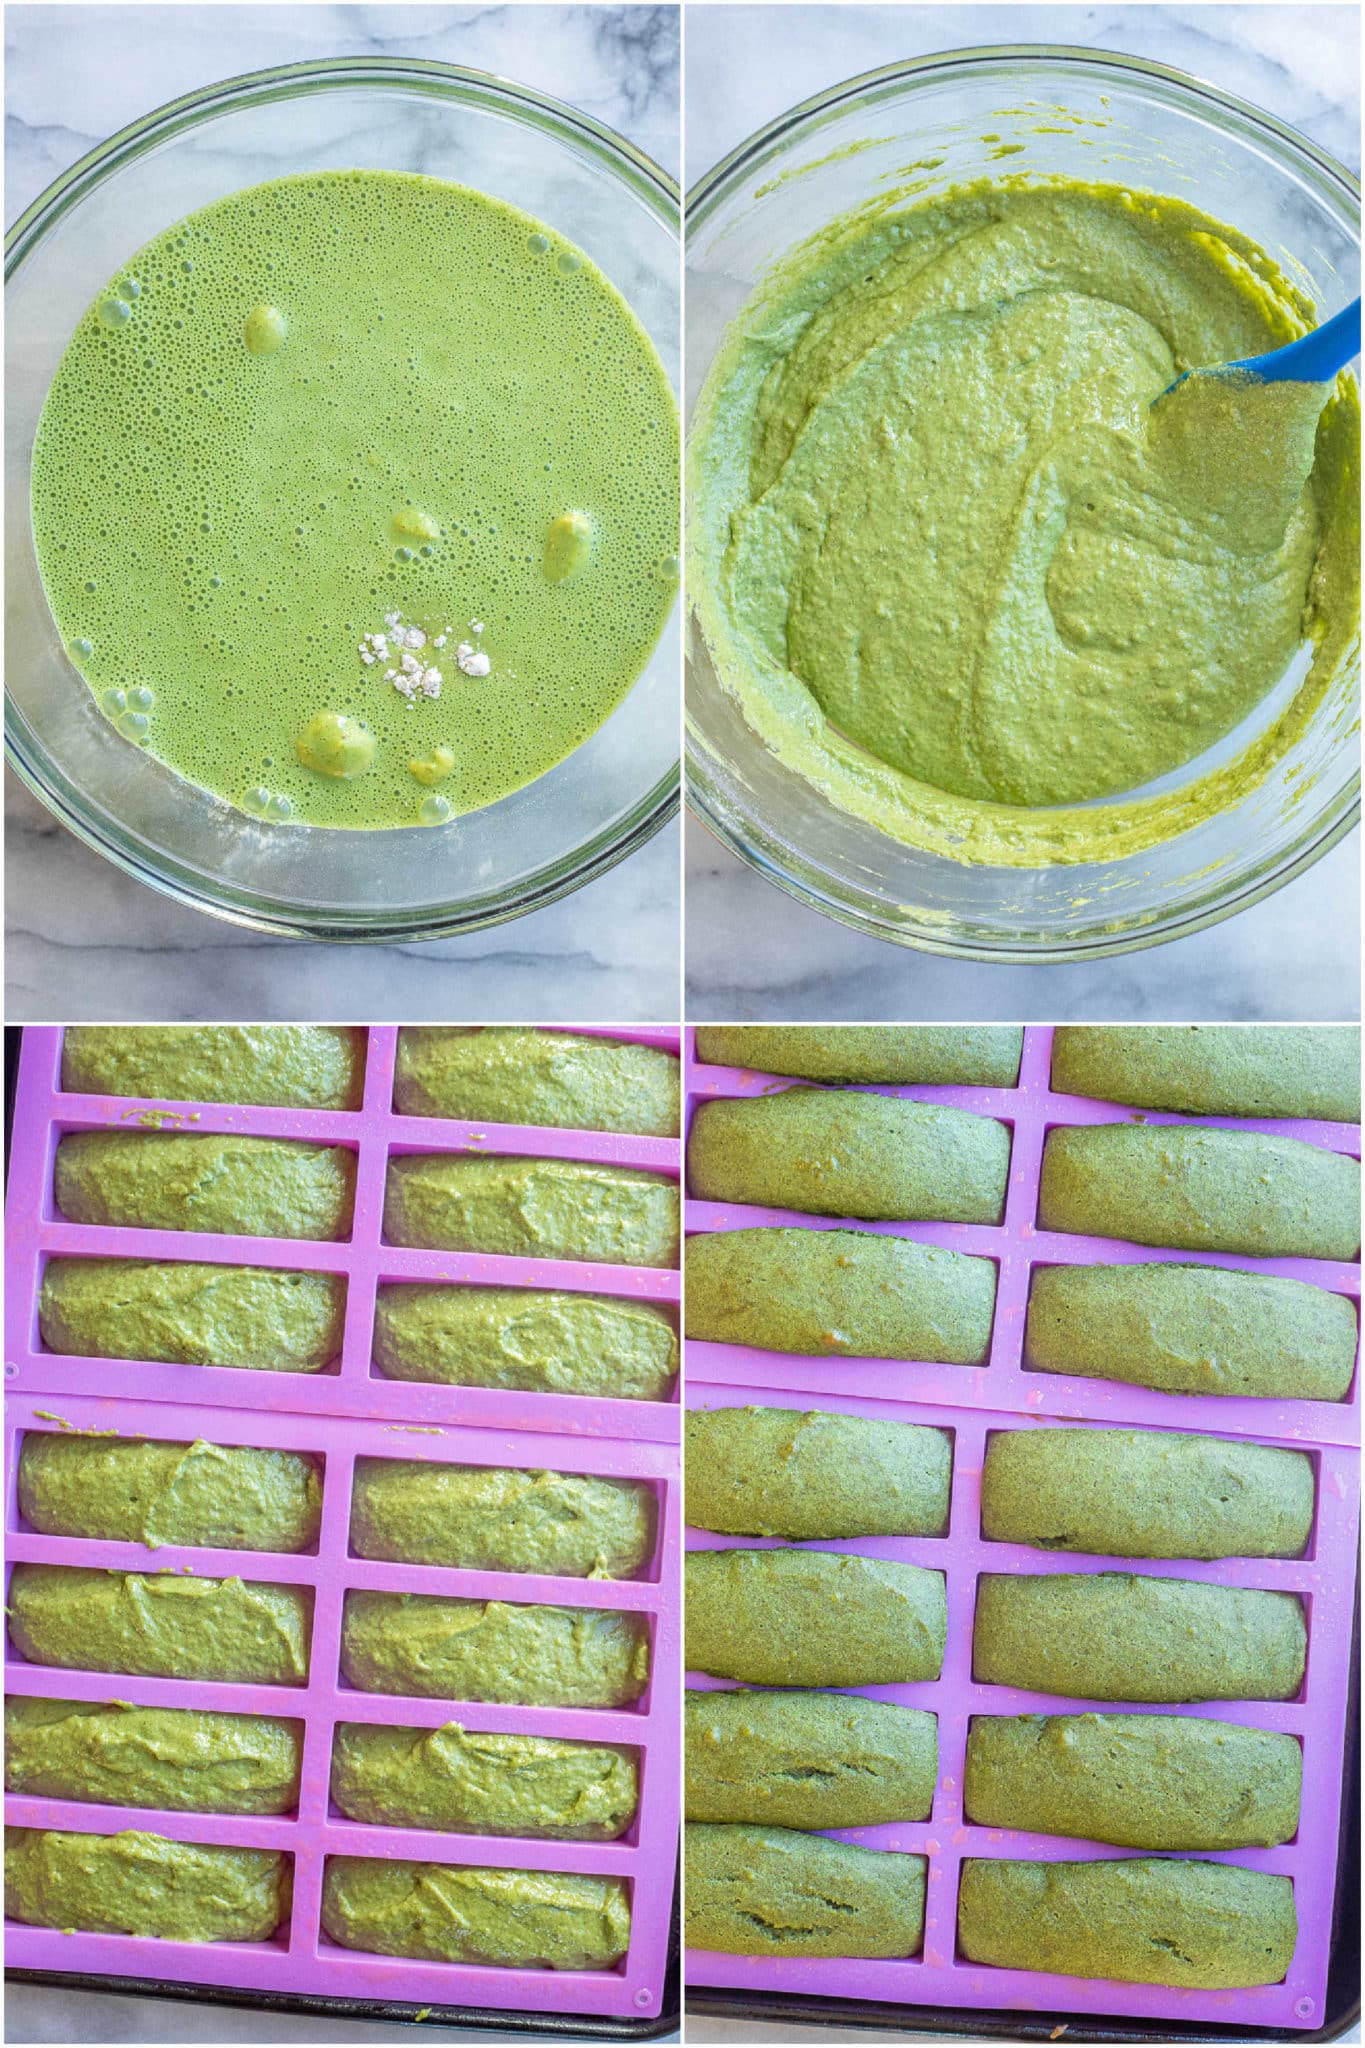 green muffin batter in a granola bar mold before and after it has been baked